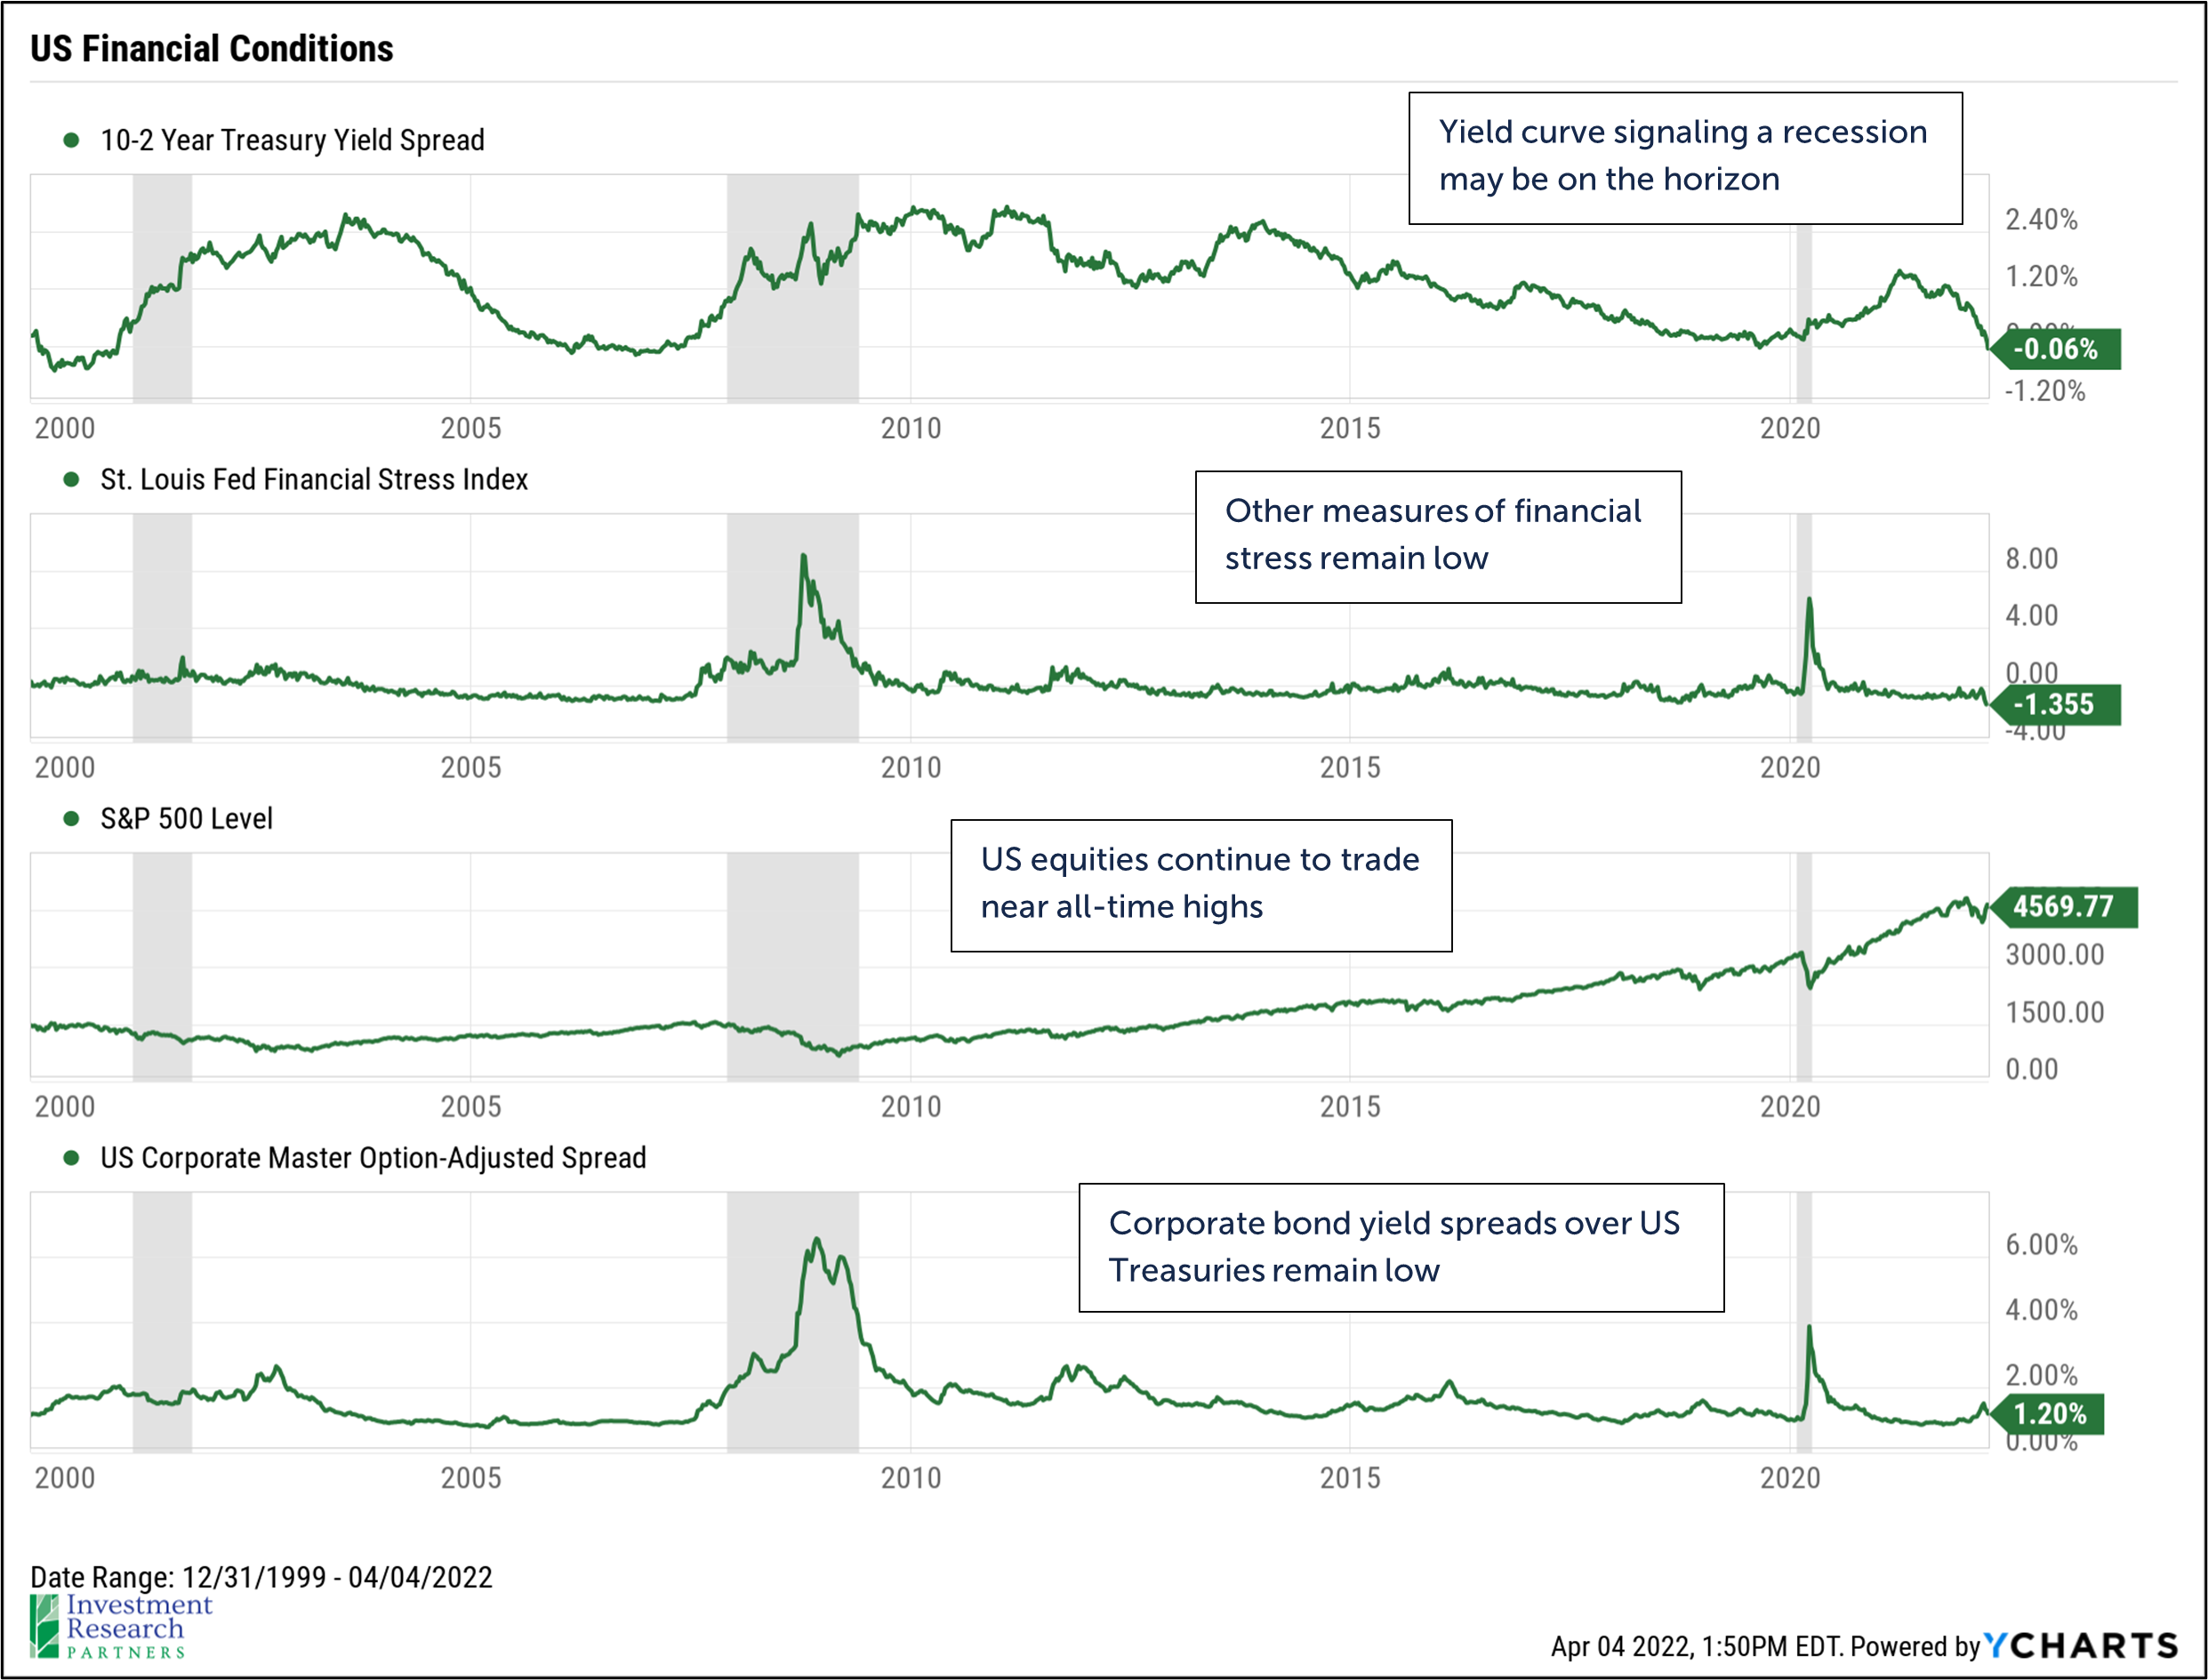 Line graphs depicting US Financial Conditions, including 10-2 Year Treasury Yield Spread, St. Louis Fed Financial Stress Index, S&P 500 Level, and US Corporate Master Option-Adjusted Spread